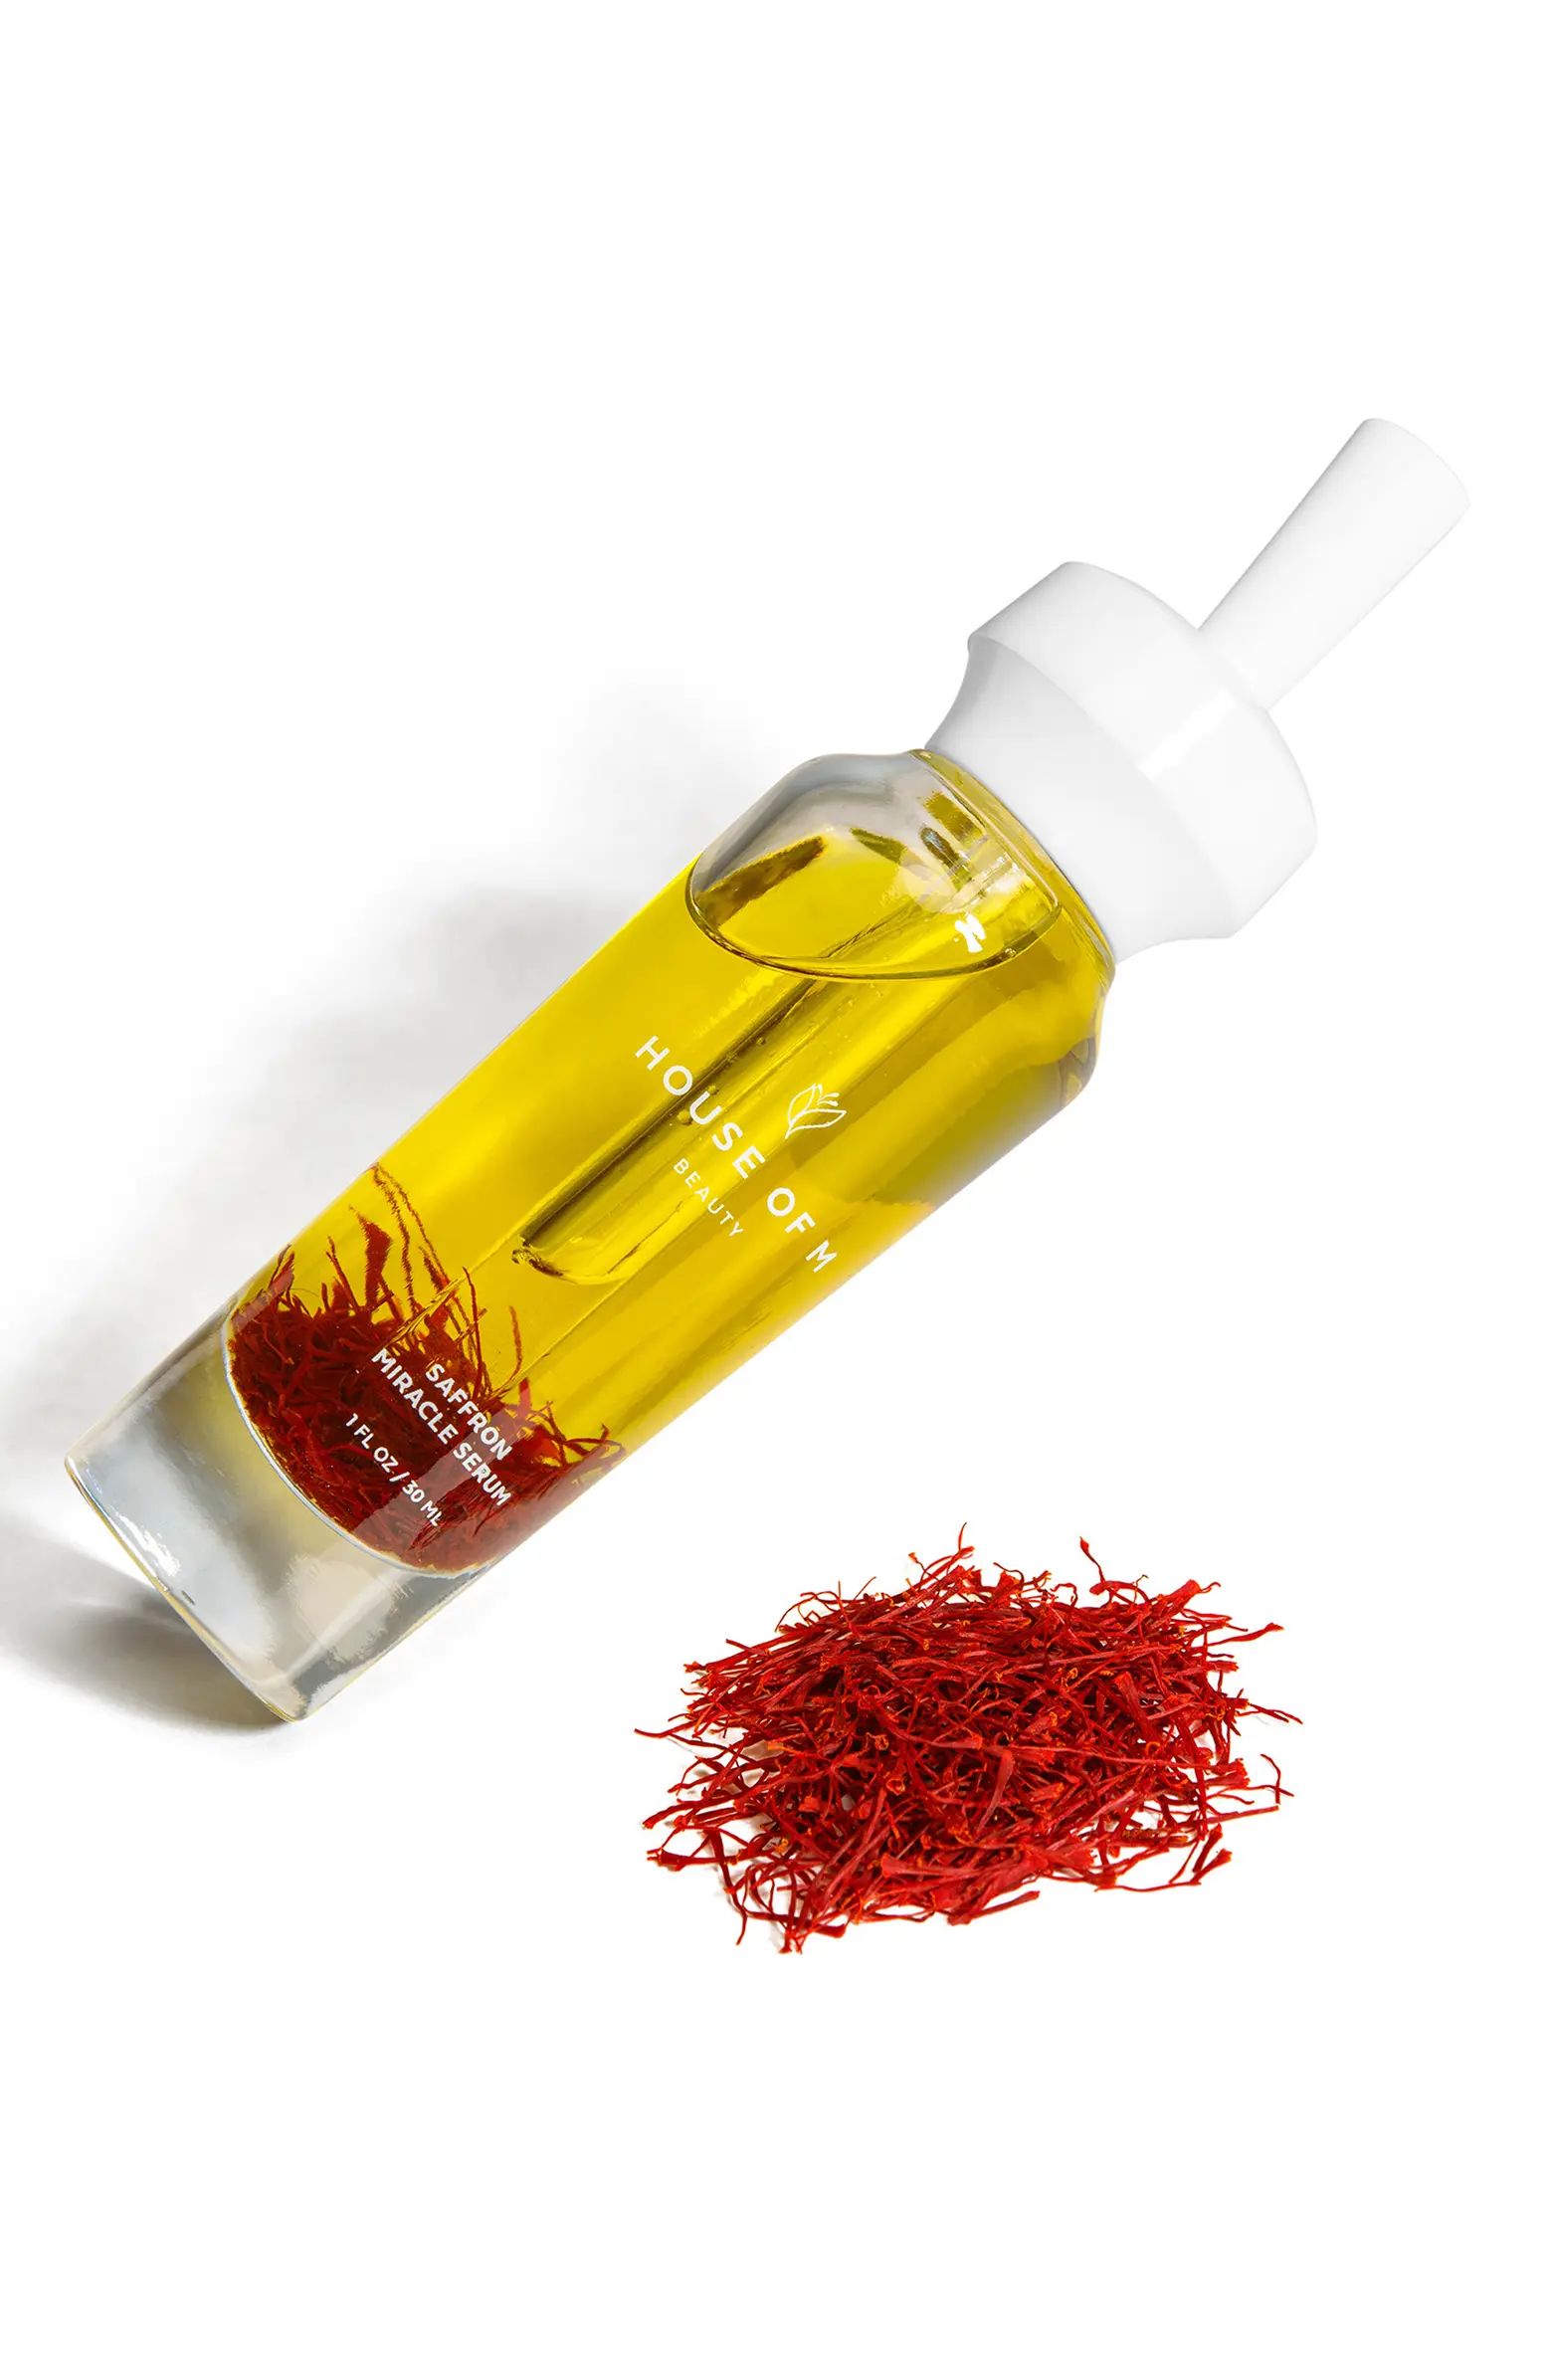 HOUSE OF M Saffron Miracle Serum | Nordstrom | Nordstrom